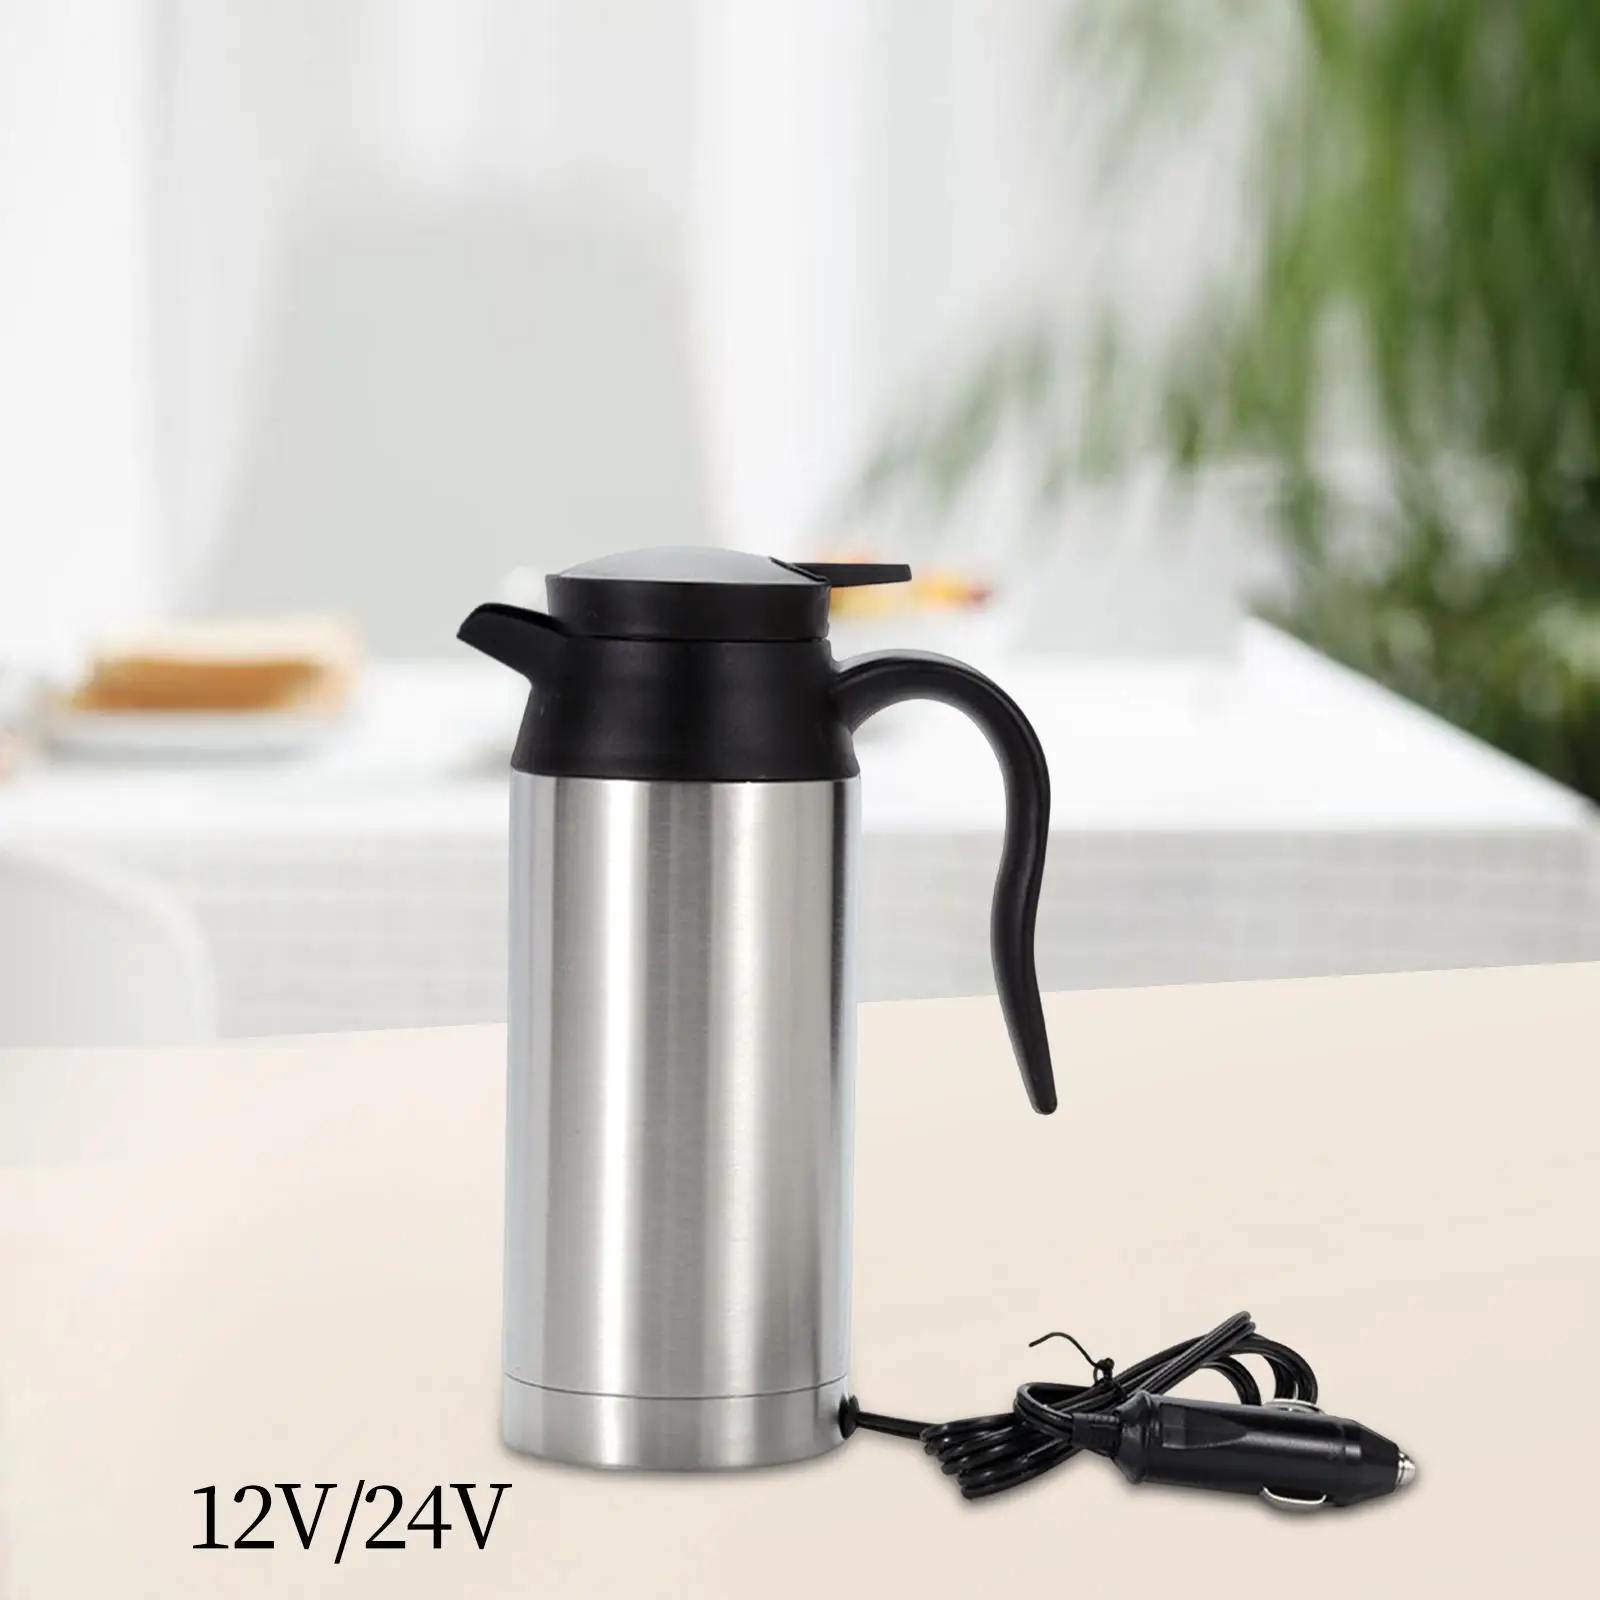 750ml Stainless Steel Electric Car Kettle Heating Cup Durable Coffee Mug Pot